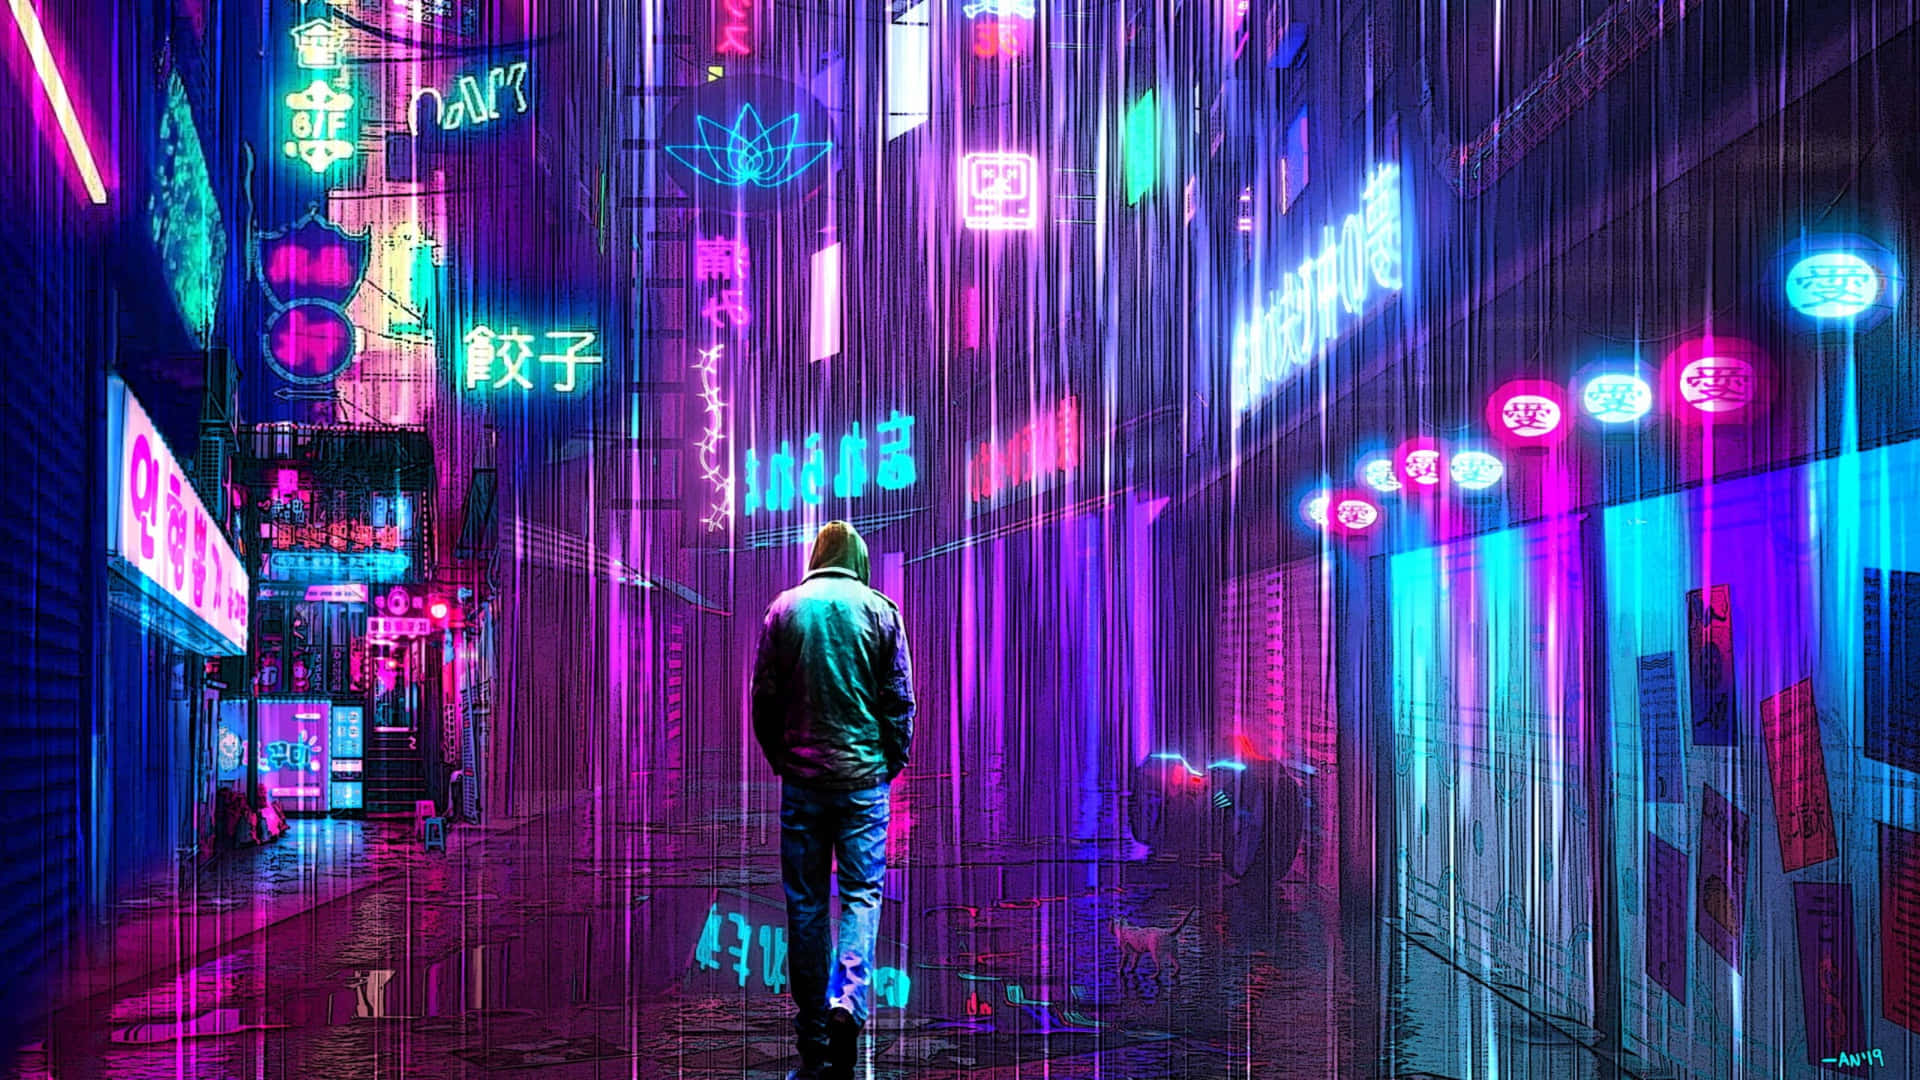 Feel the night come alive in a glowing neon city Wallpaper